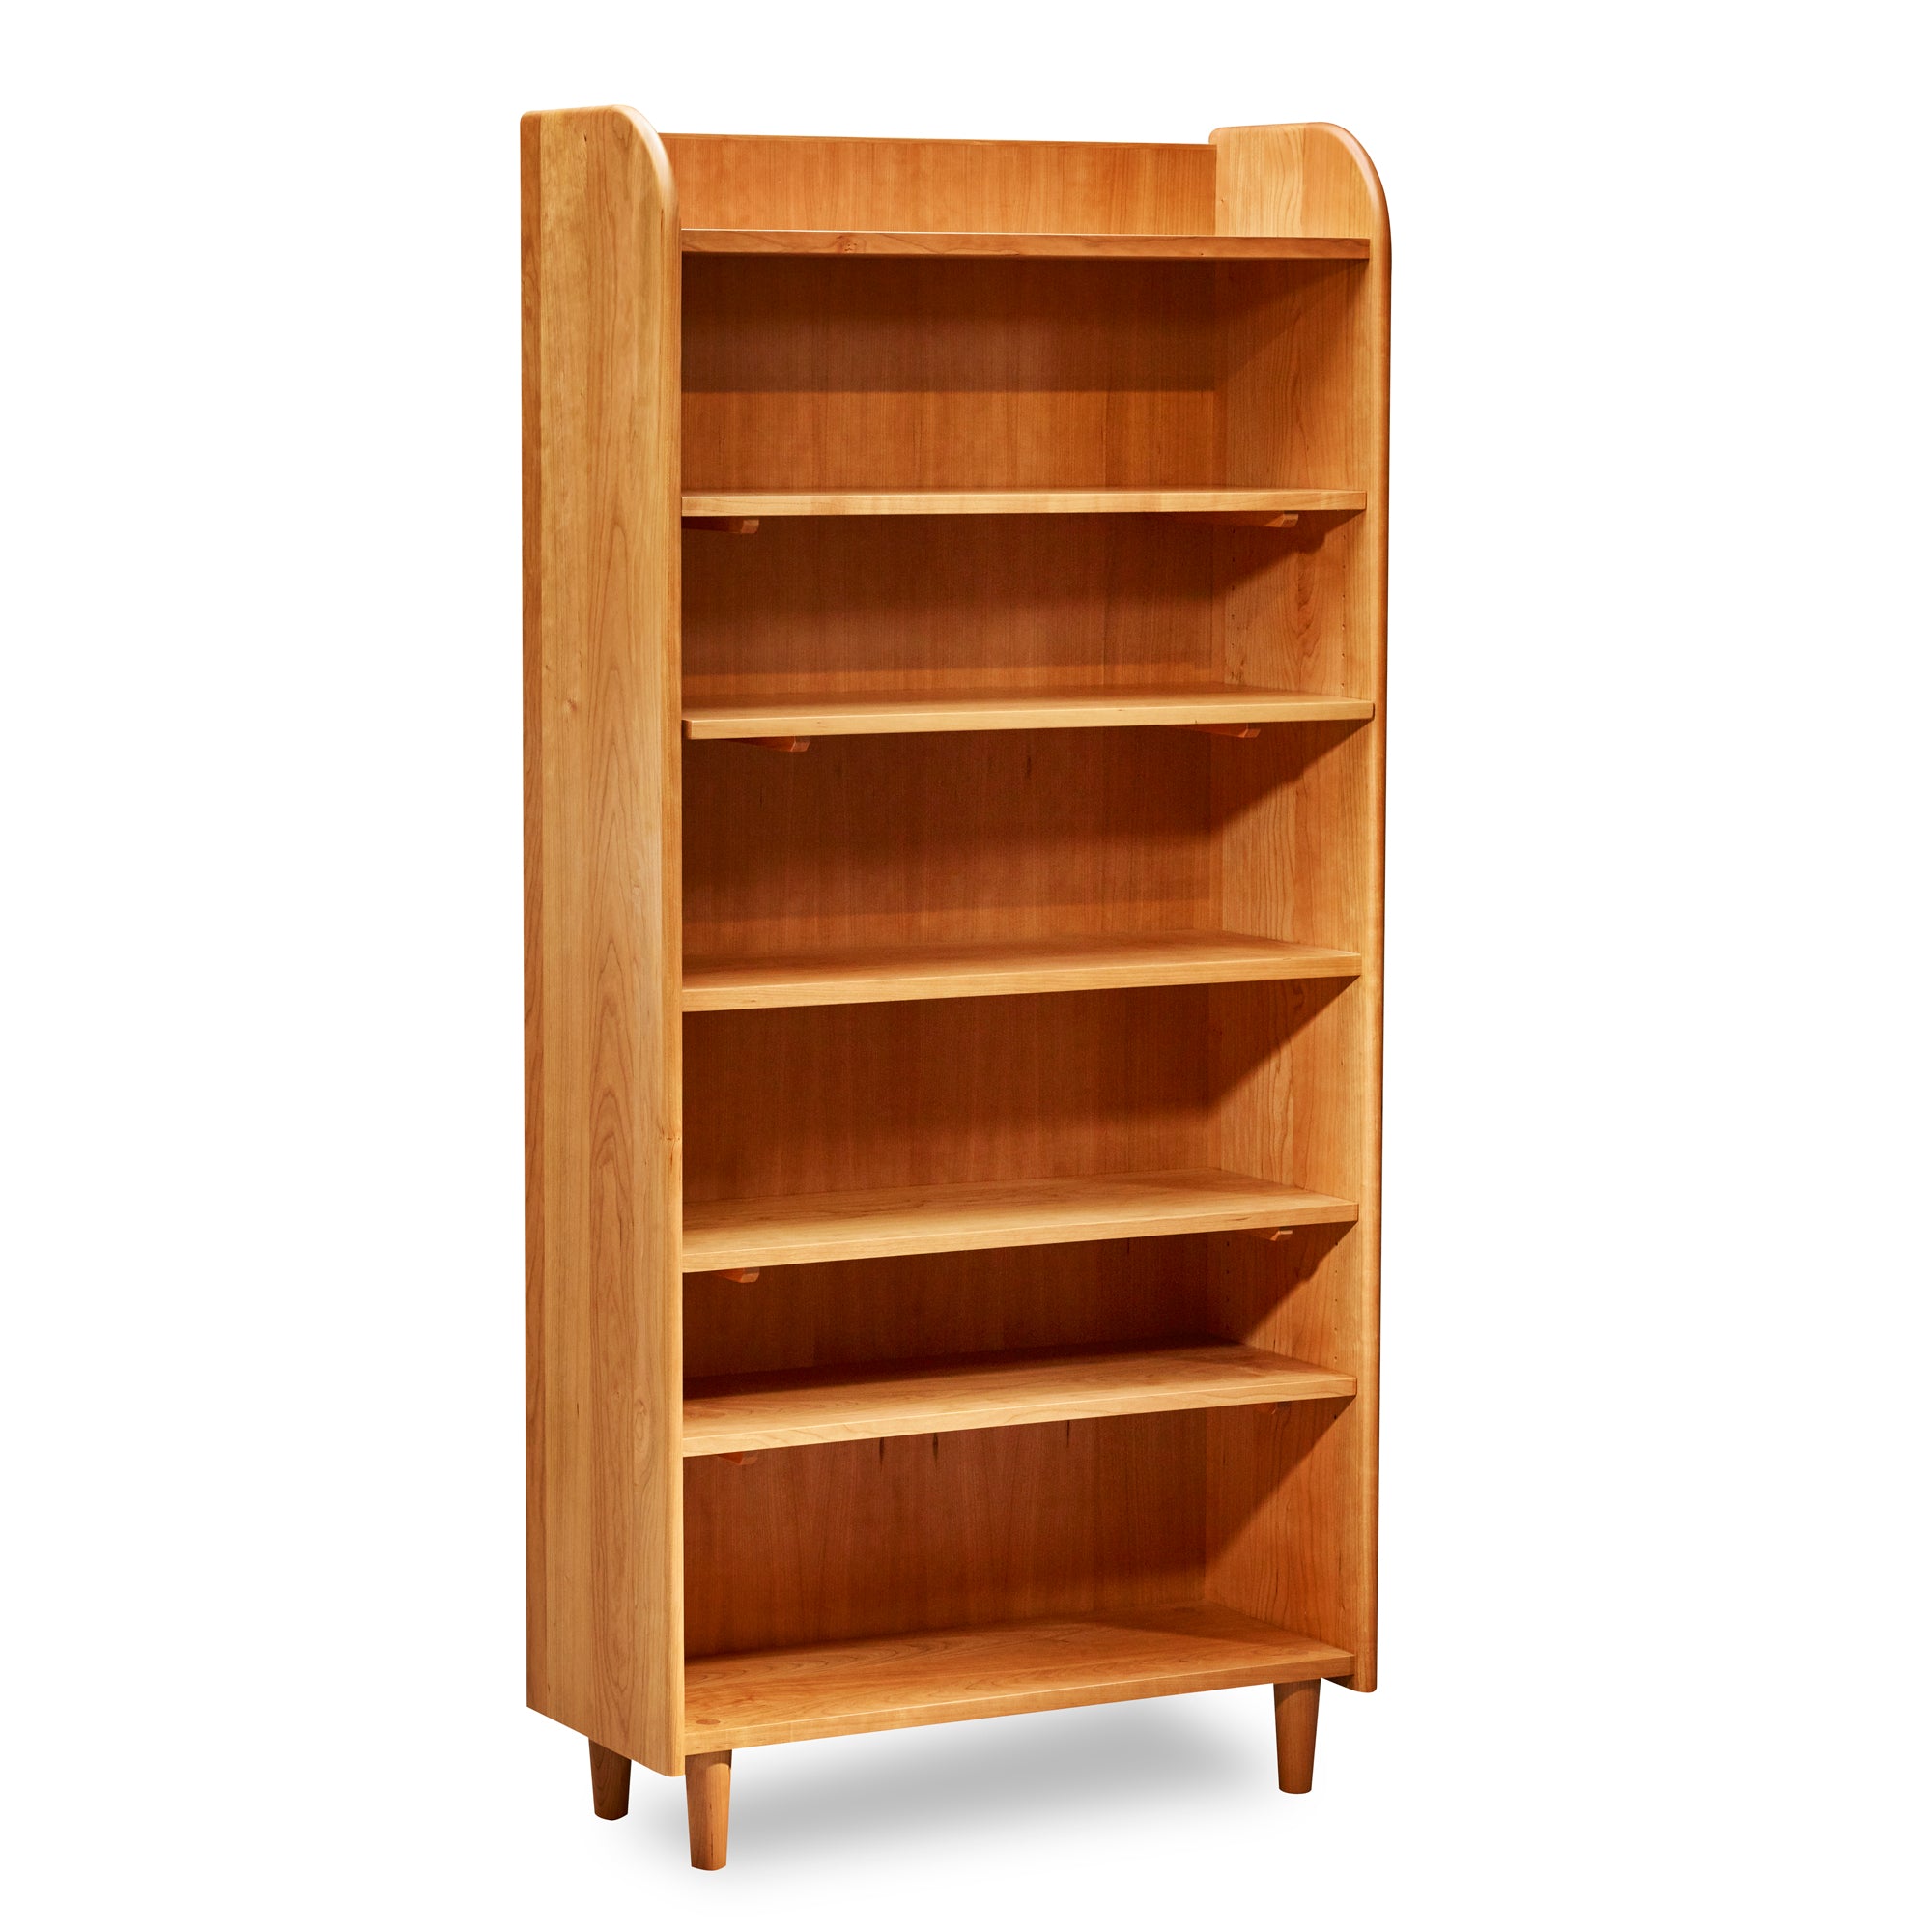 Tall bookshelf with open top, rounded corners, and round tapered legs, in cherry wood.